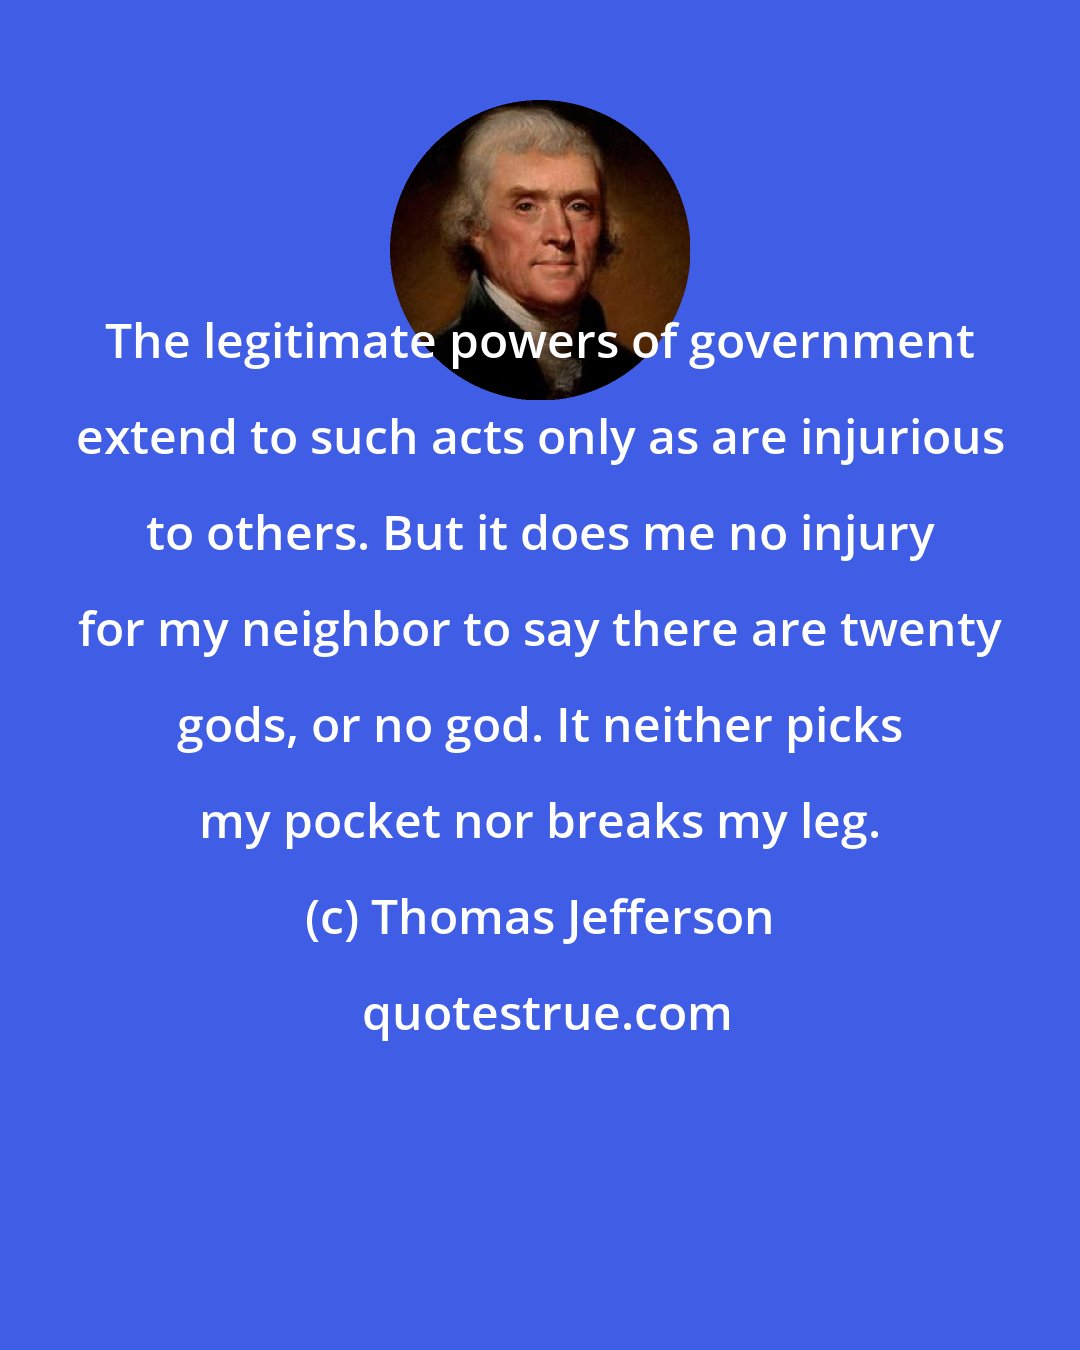 Thomas Jefferson: The legitimate powers of government extend to such acts only as are injurious to others. But it does me no injury for my neighbor to say there are twenty gods, or no god. It neither picks my pocket nor breaks my leg.